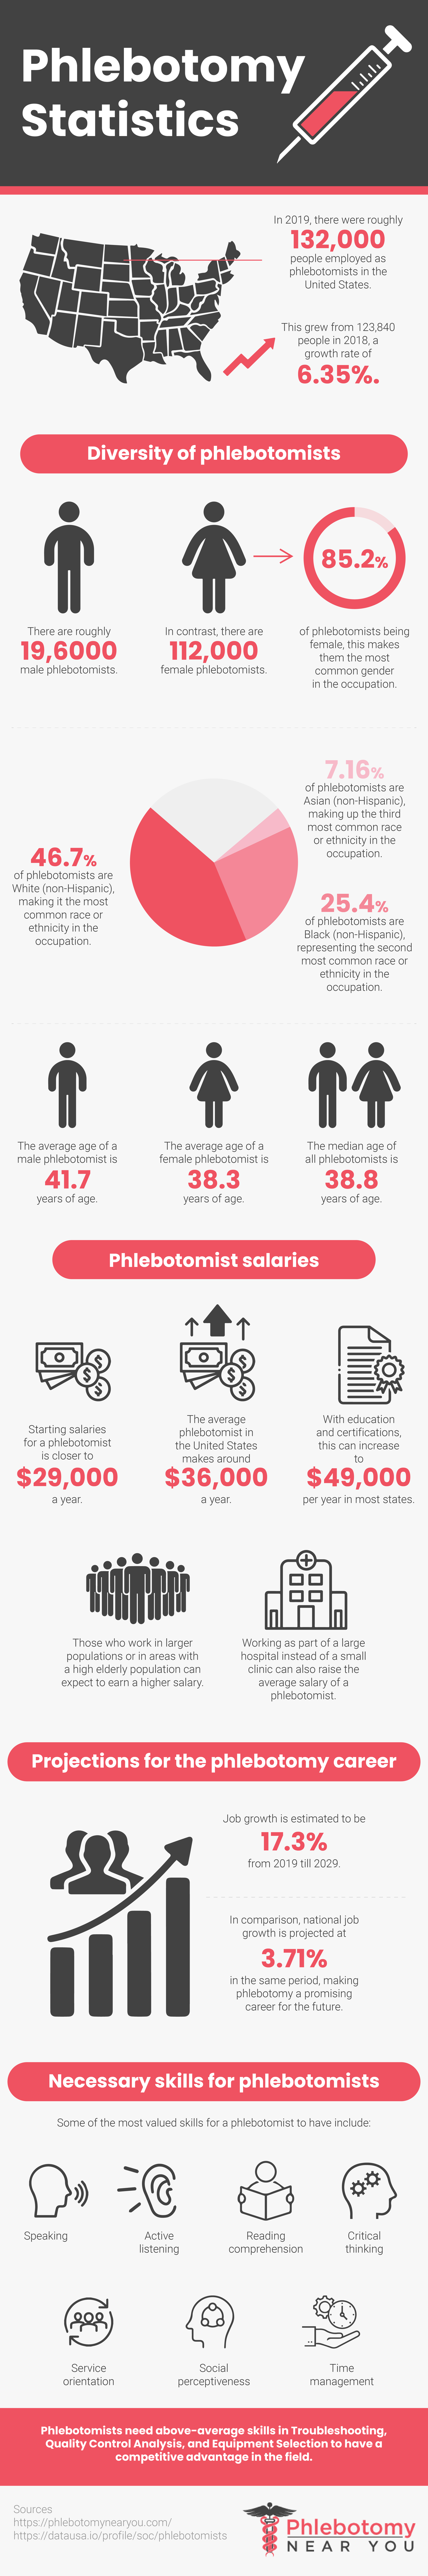 How To Branch Out Into A New Career Path In The Medical Field | phlebotomynearyou phlebotomy statistics